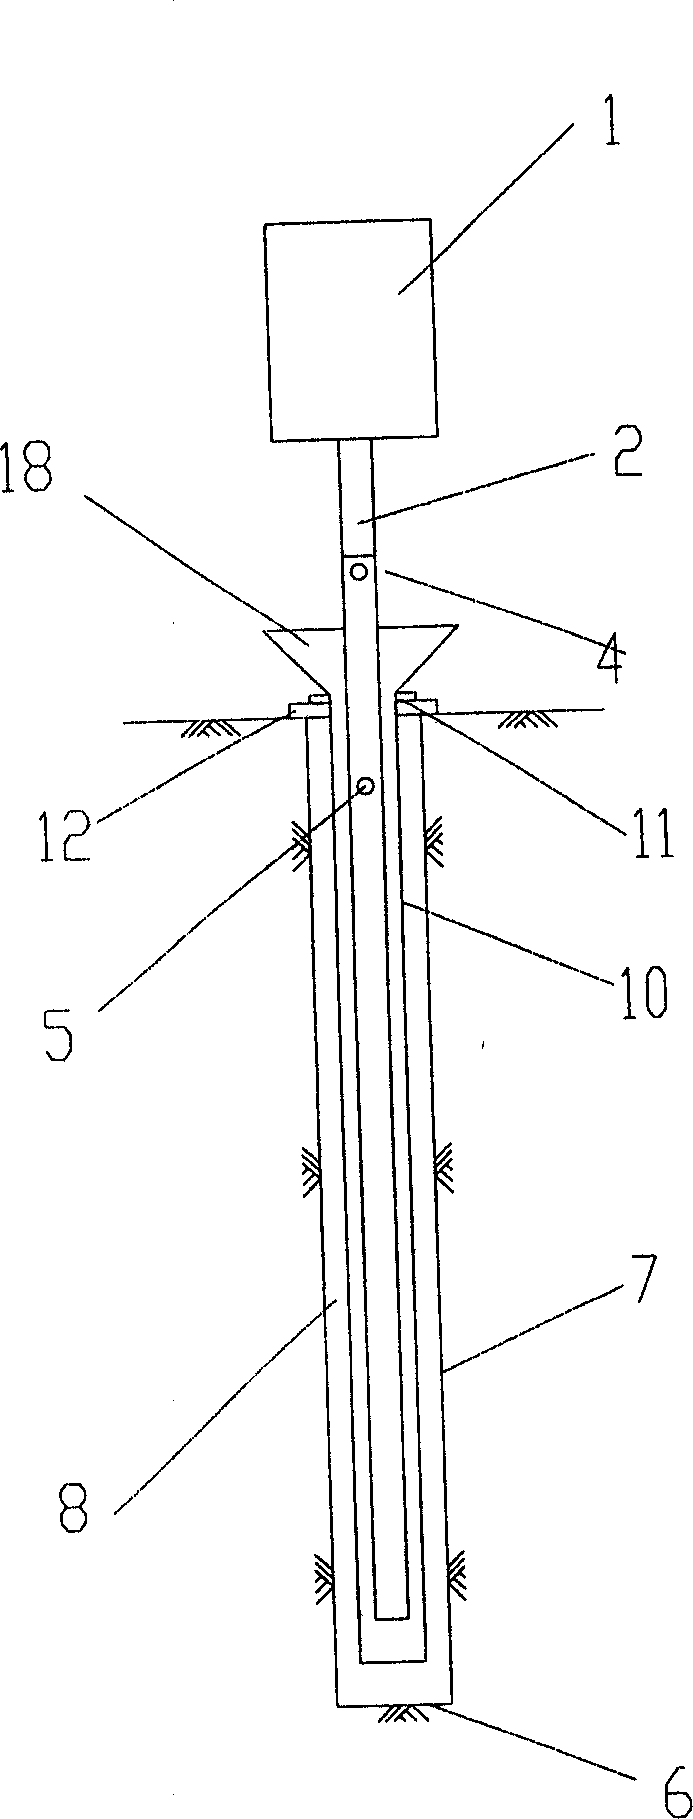 Method of vibration and extrusion for cast-in-place concrete in pile hole and its vibration rod device